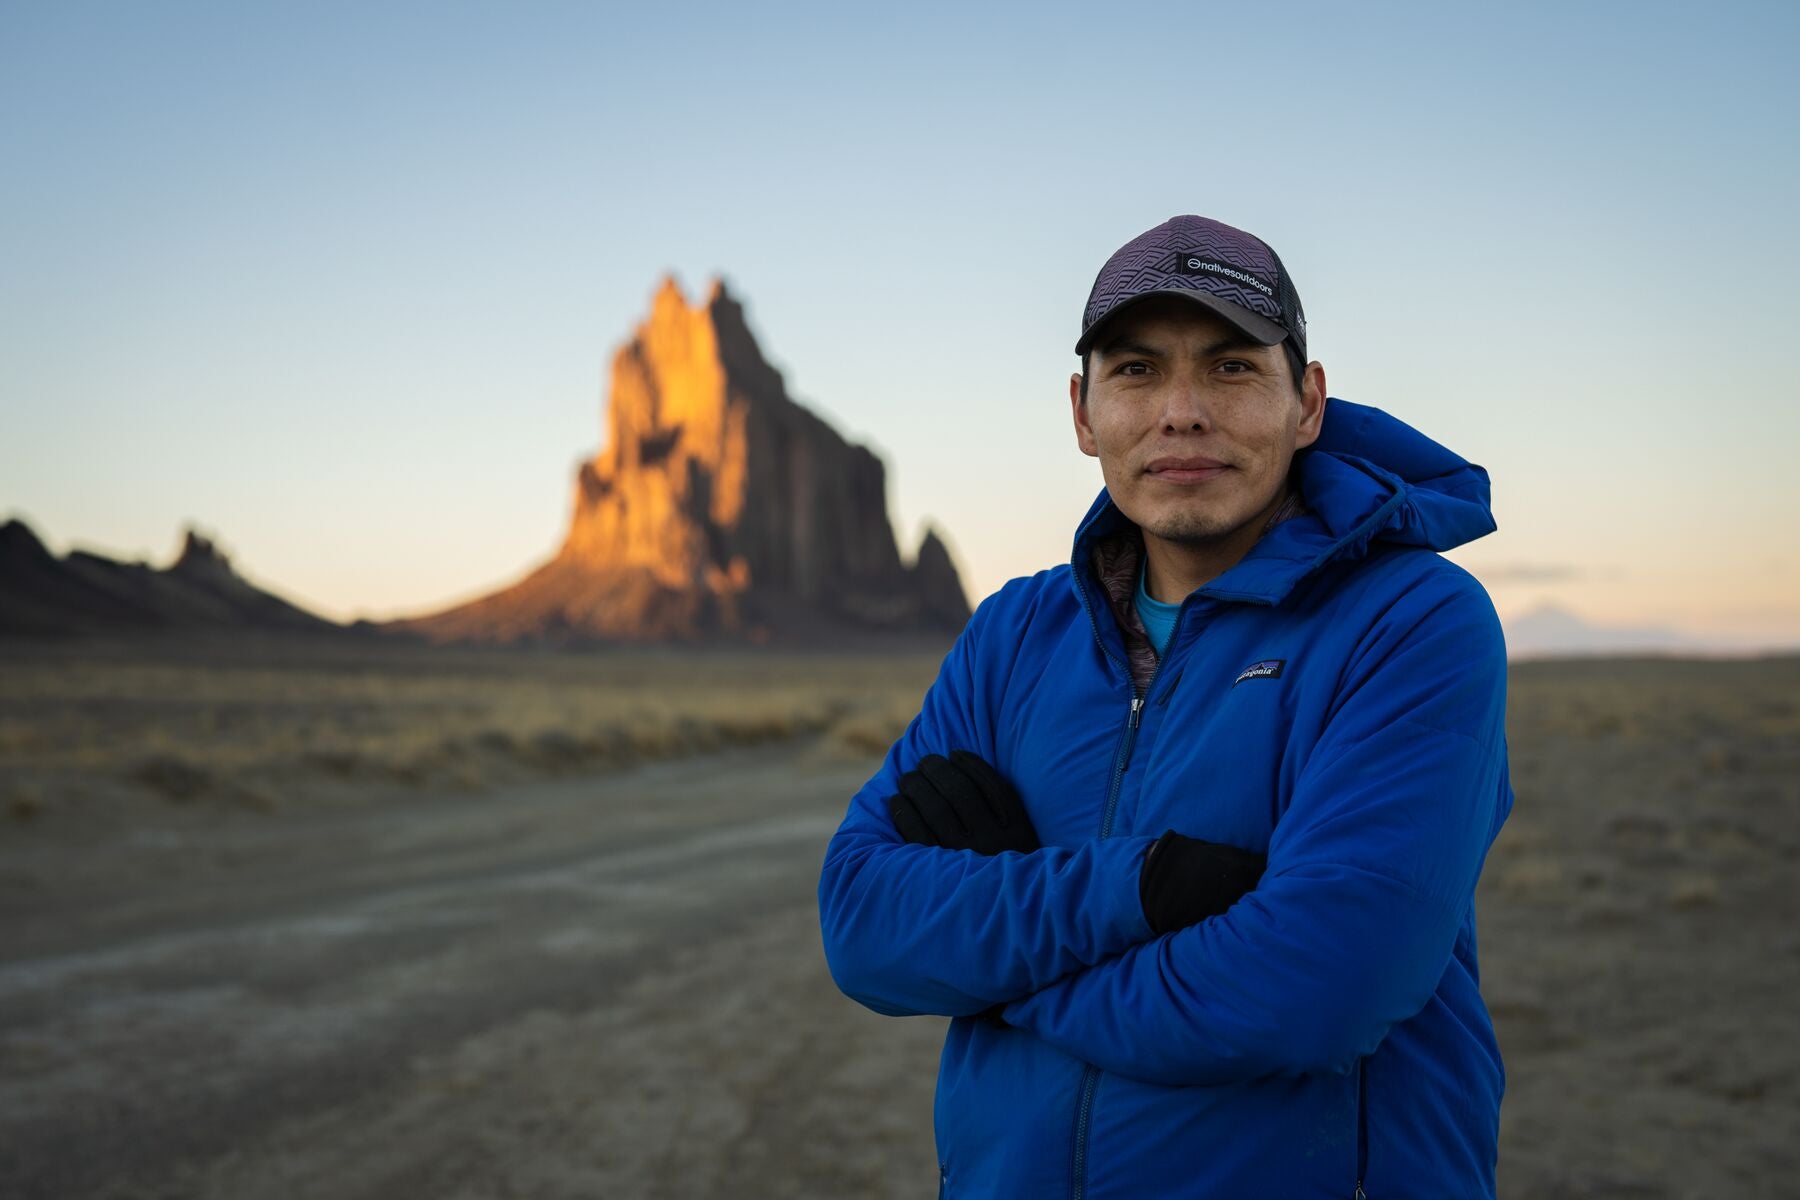 A portrait of Vernan Kee in the Navajo Nation.